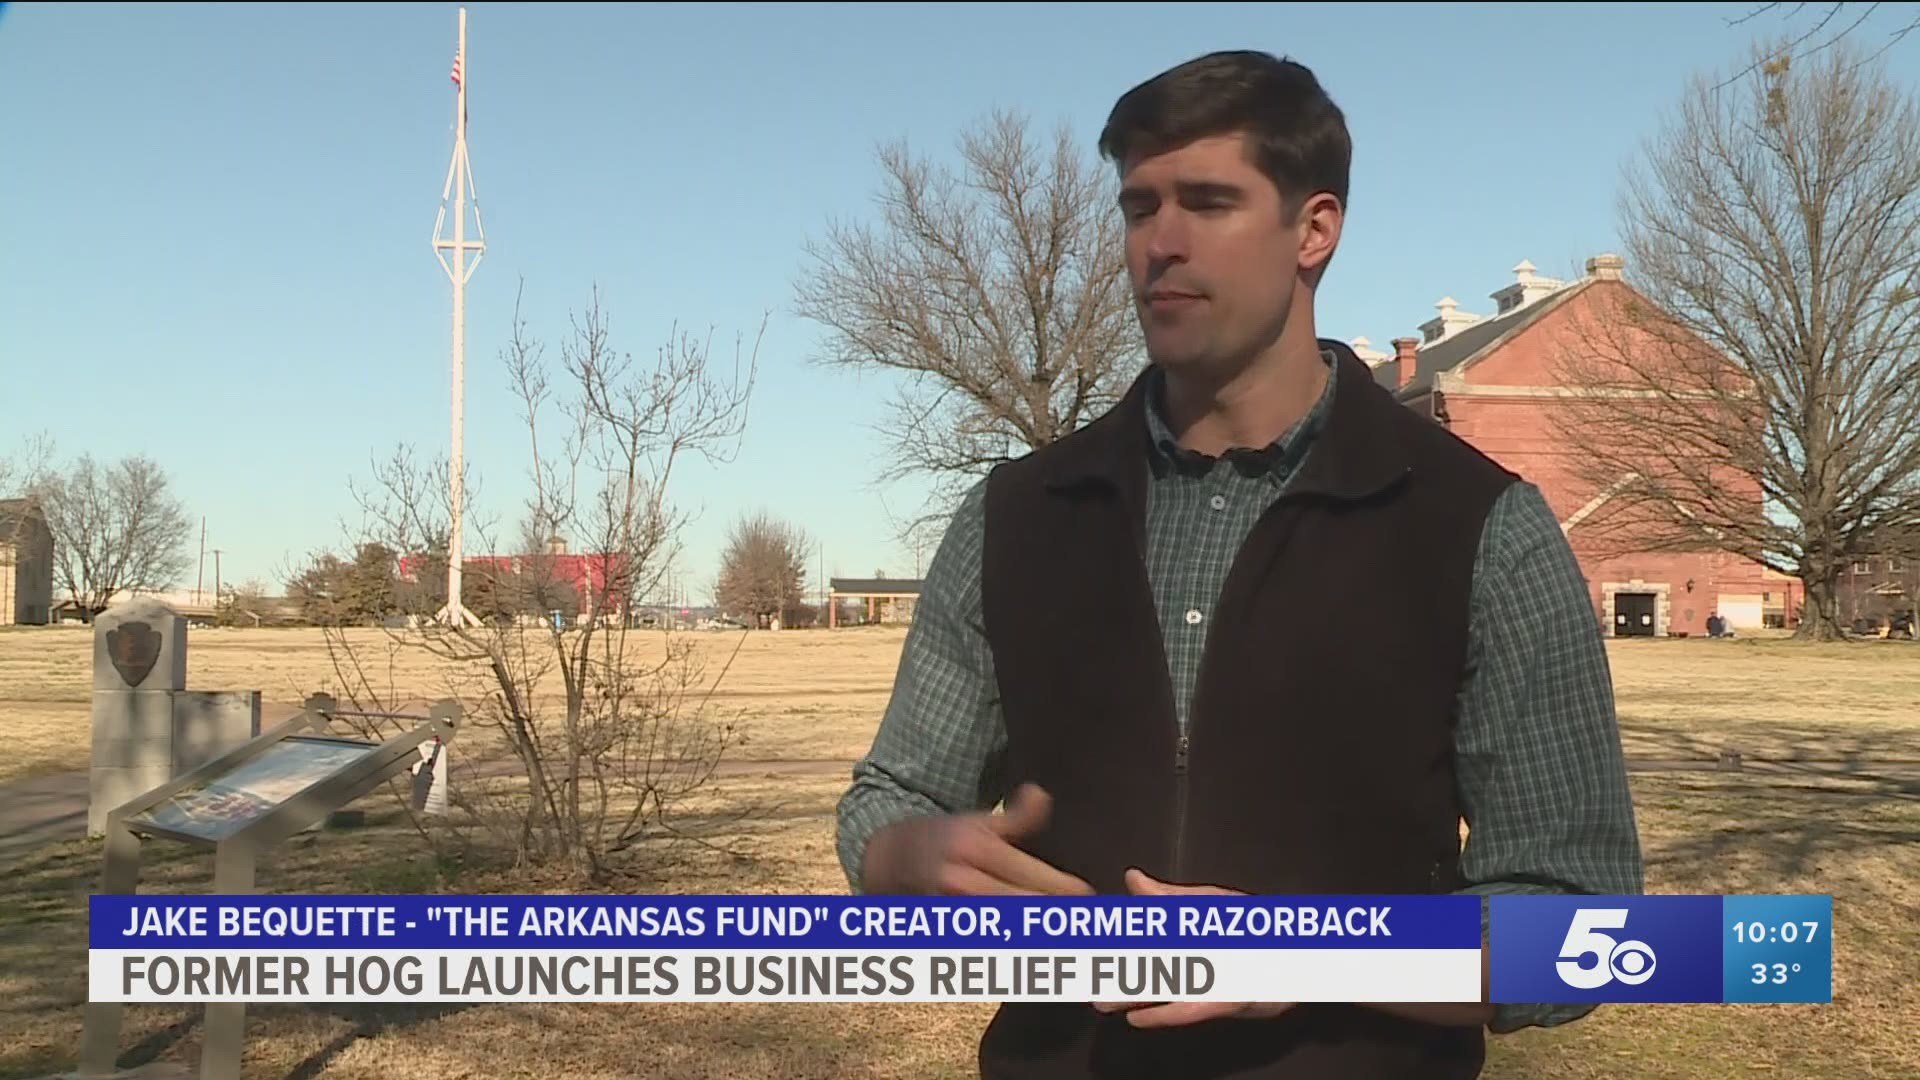 Jake Bequette started "The Arkansas Fund" organization when the pandemic started. The organization has raised more than $100,000 so far.